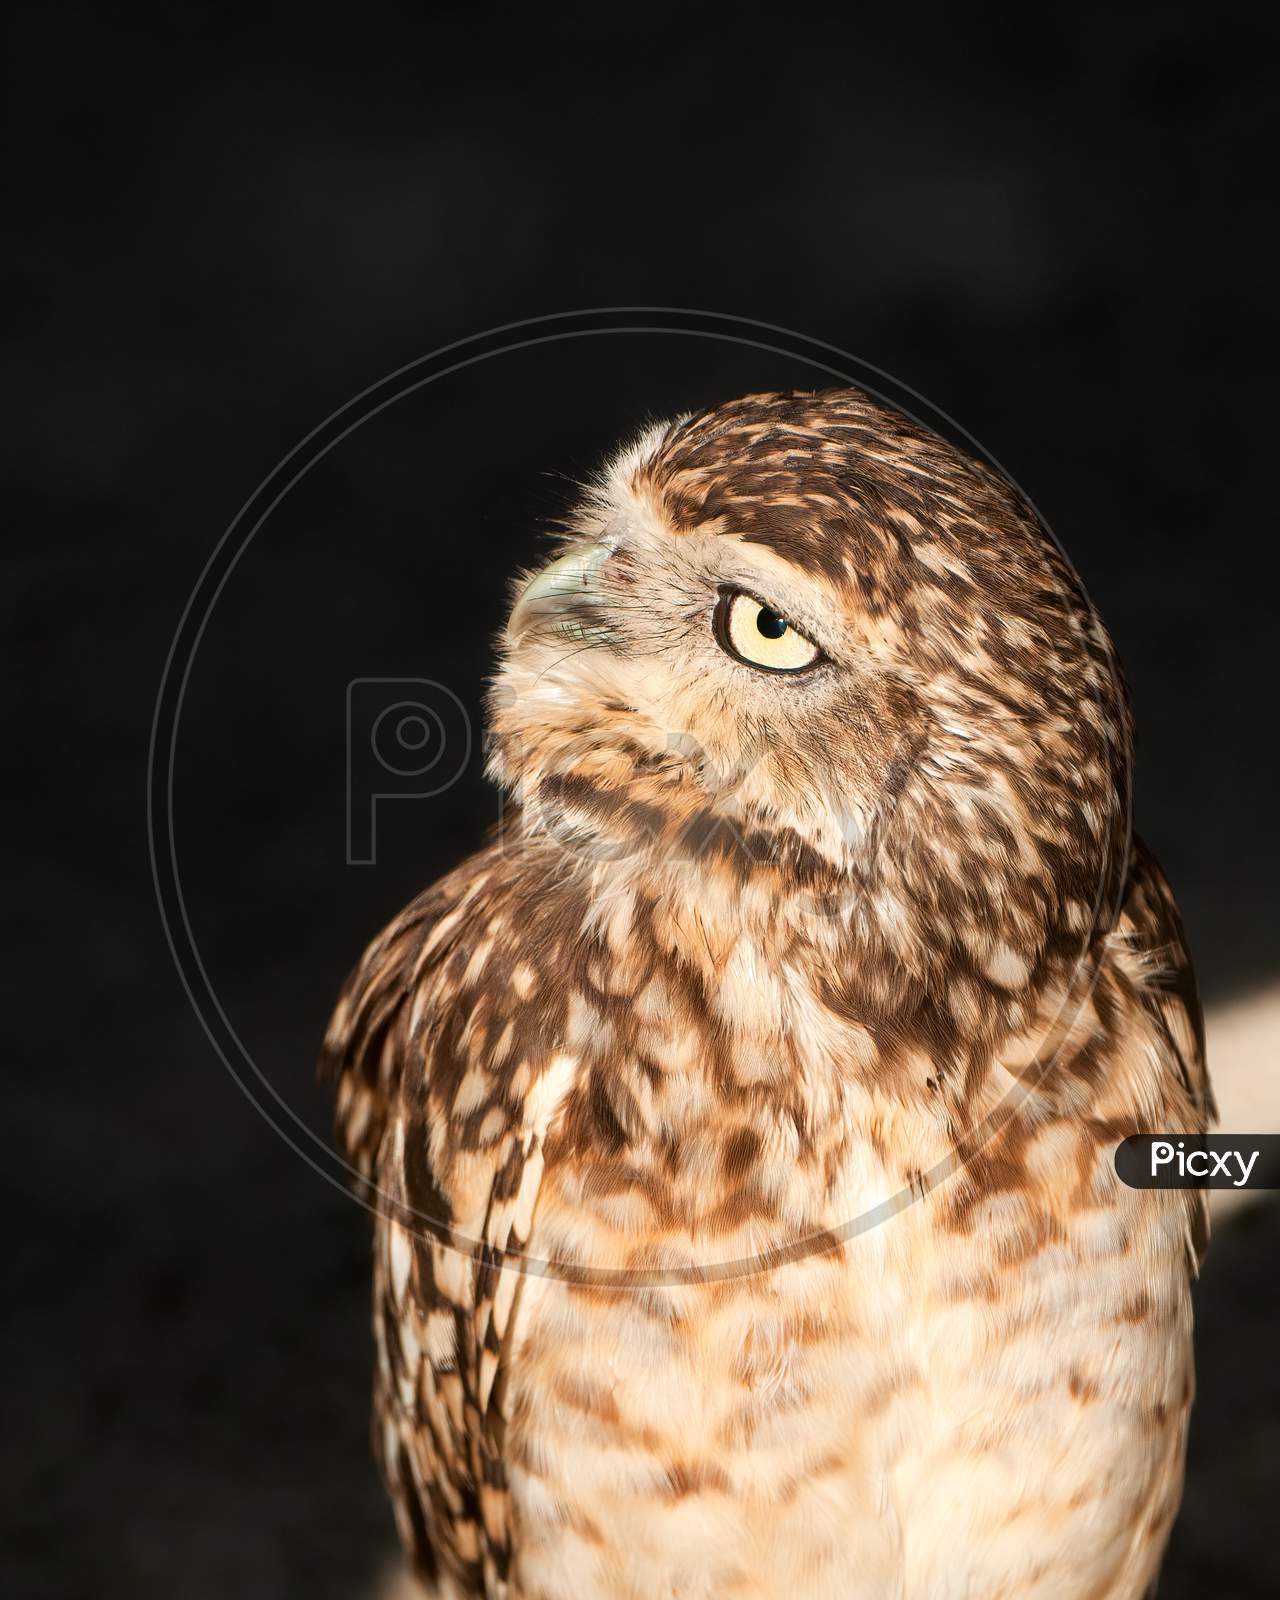 Curious Burrowing Owl, Athene Cunicularia, Looking To The Left Against Dark Background